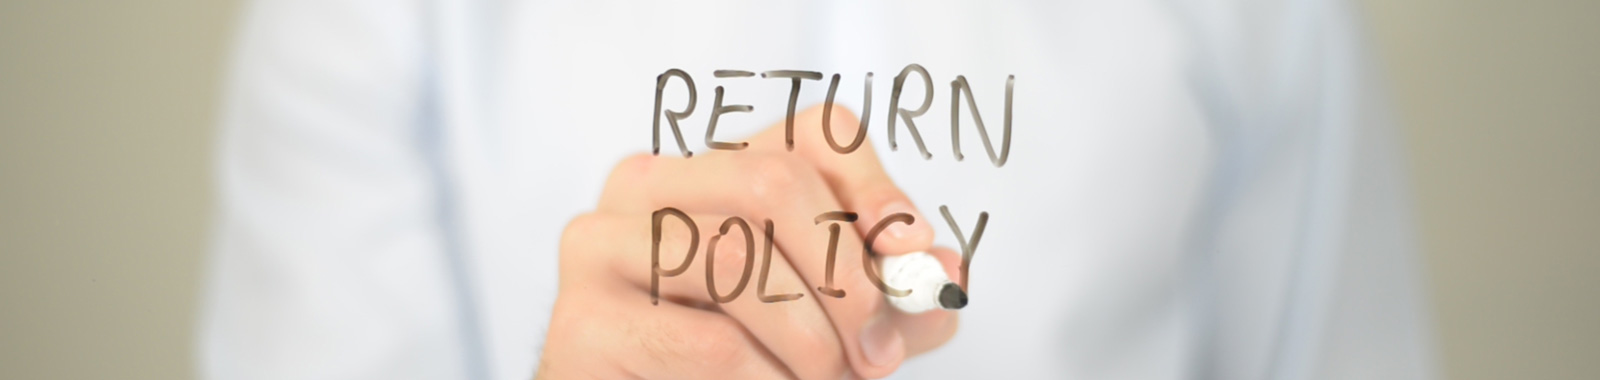 Our Return Policy